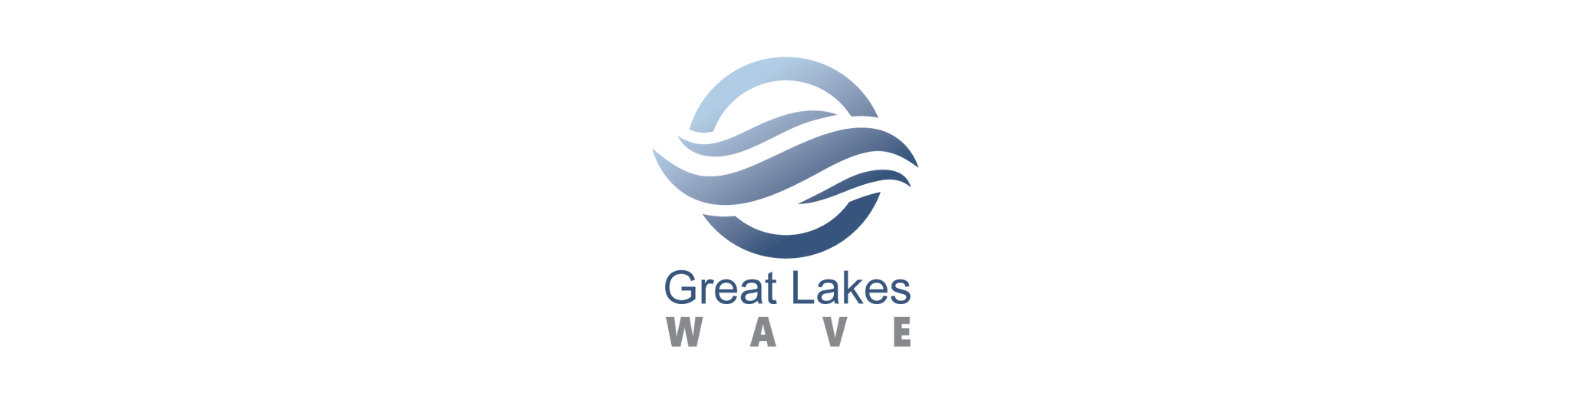 Great Lakes Wave Slider